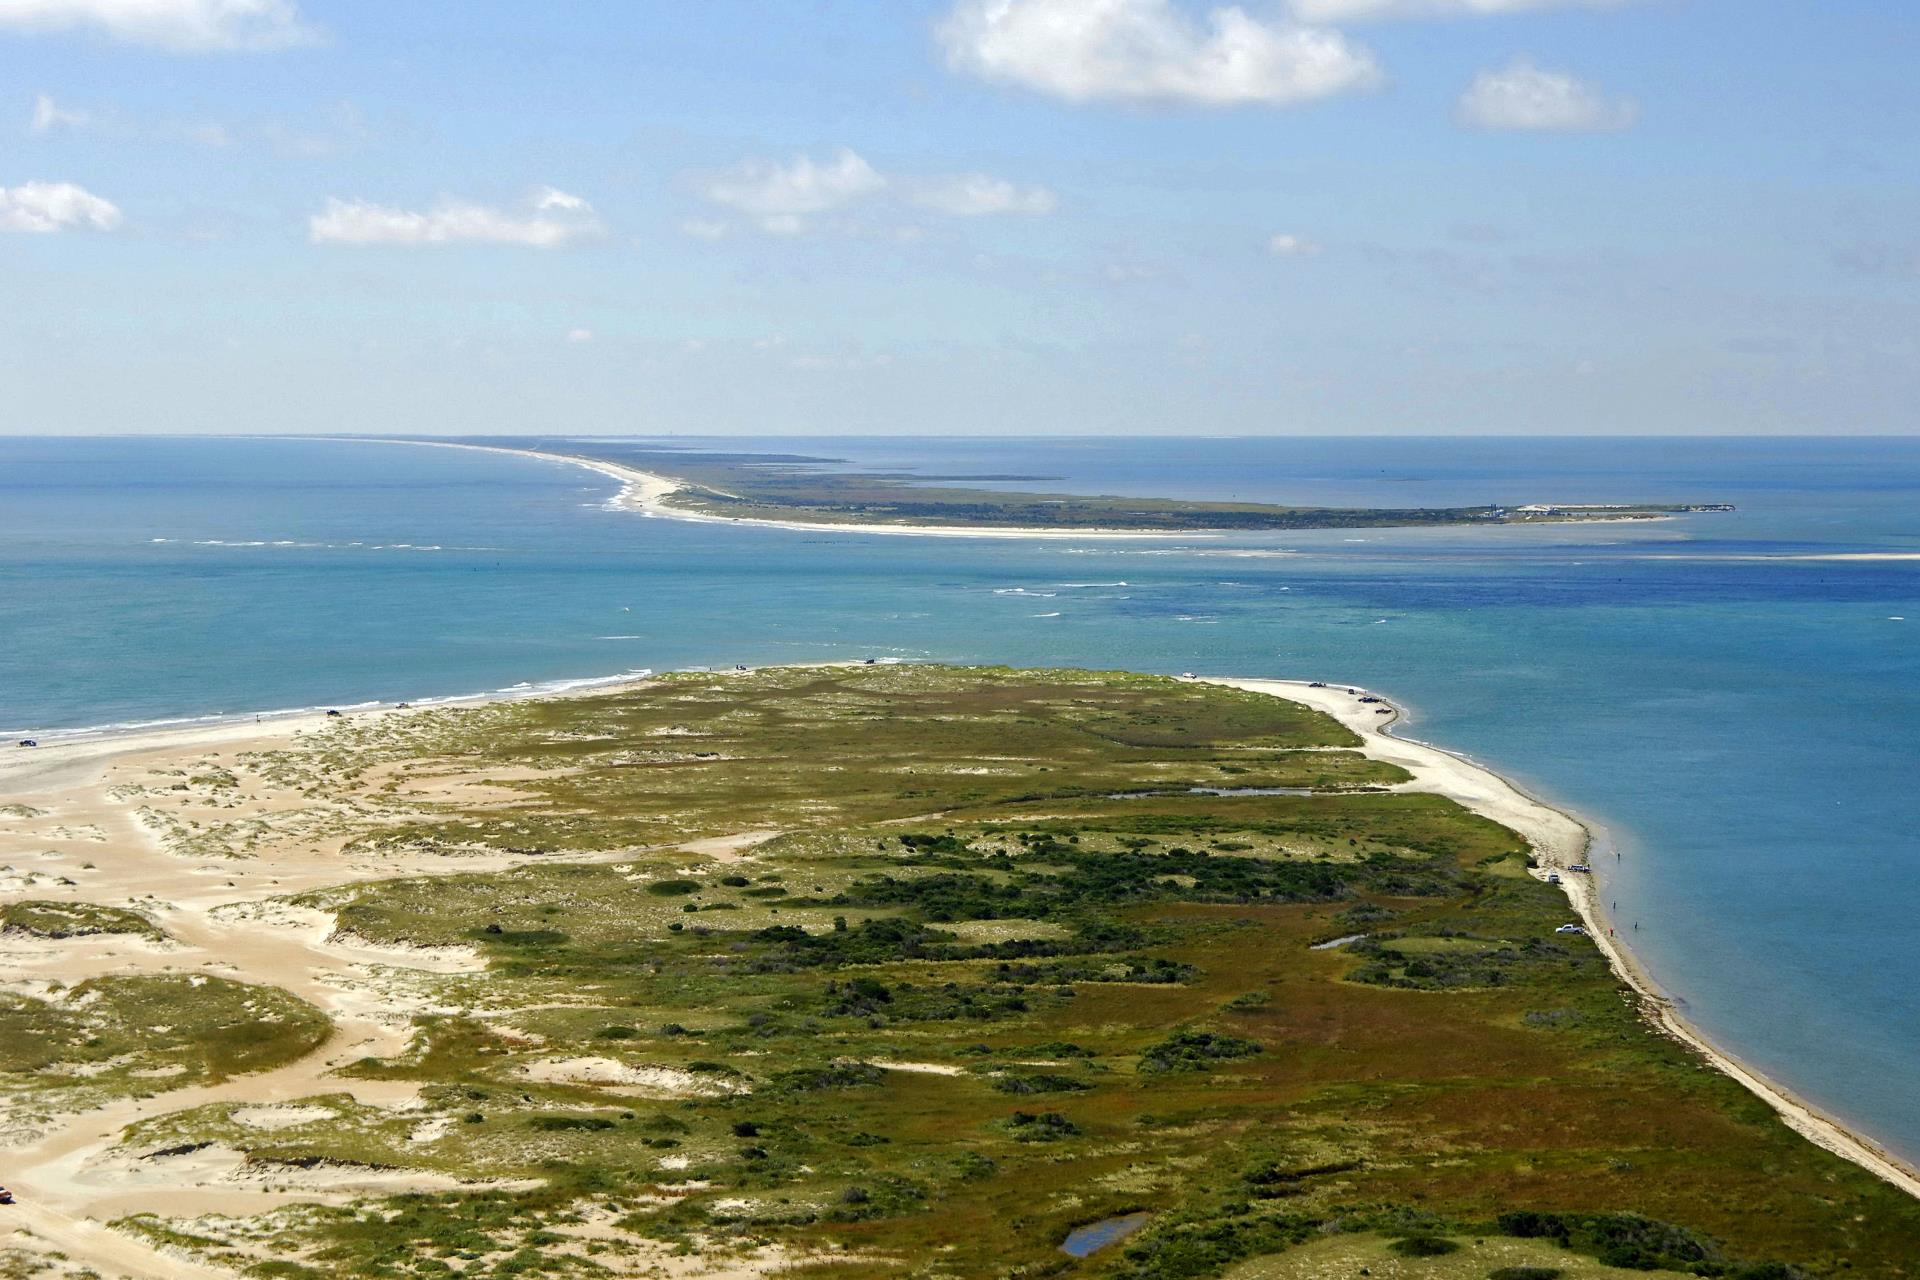 An aerial view of Hatteras Inlet which separates Hatteras Island from Ocracoke Island